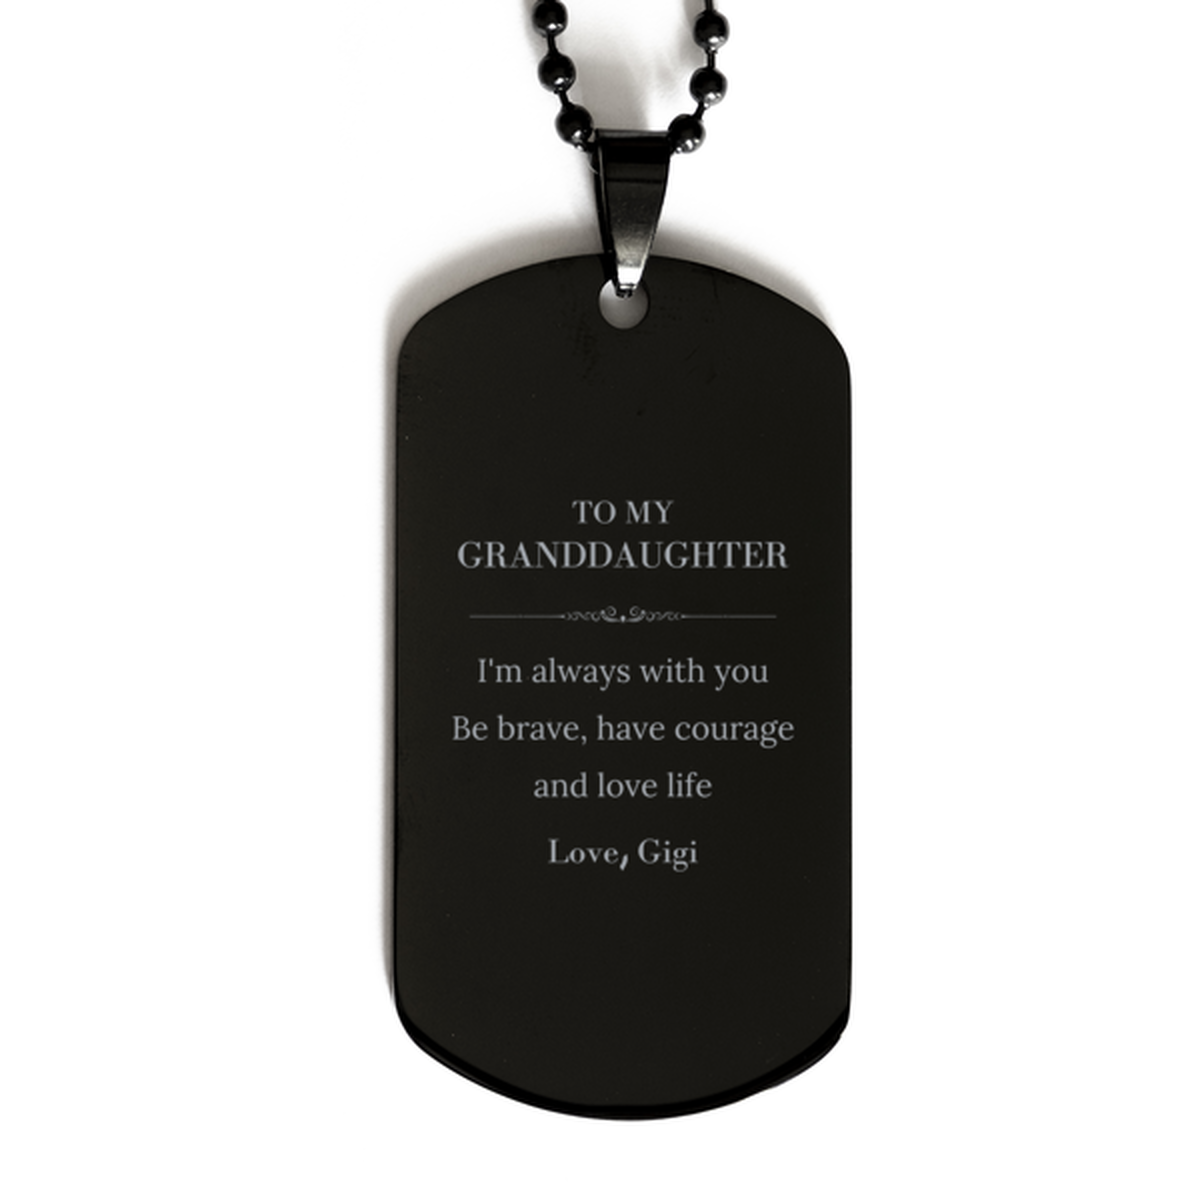 To My Granddaughter Gifts from Gigi, Unique Black Dog Tag Inspirational Christmas Birthday Graduation Gifts for Granddaughter I'm always with you. Be brave, have courage and love life. Love, Gigi